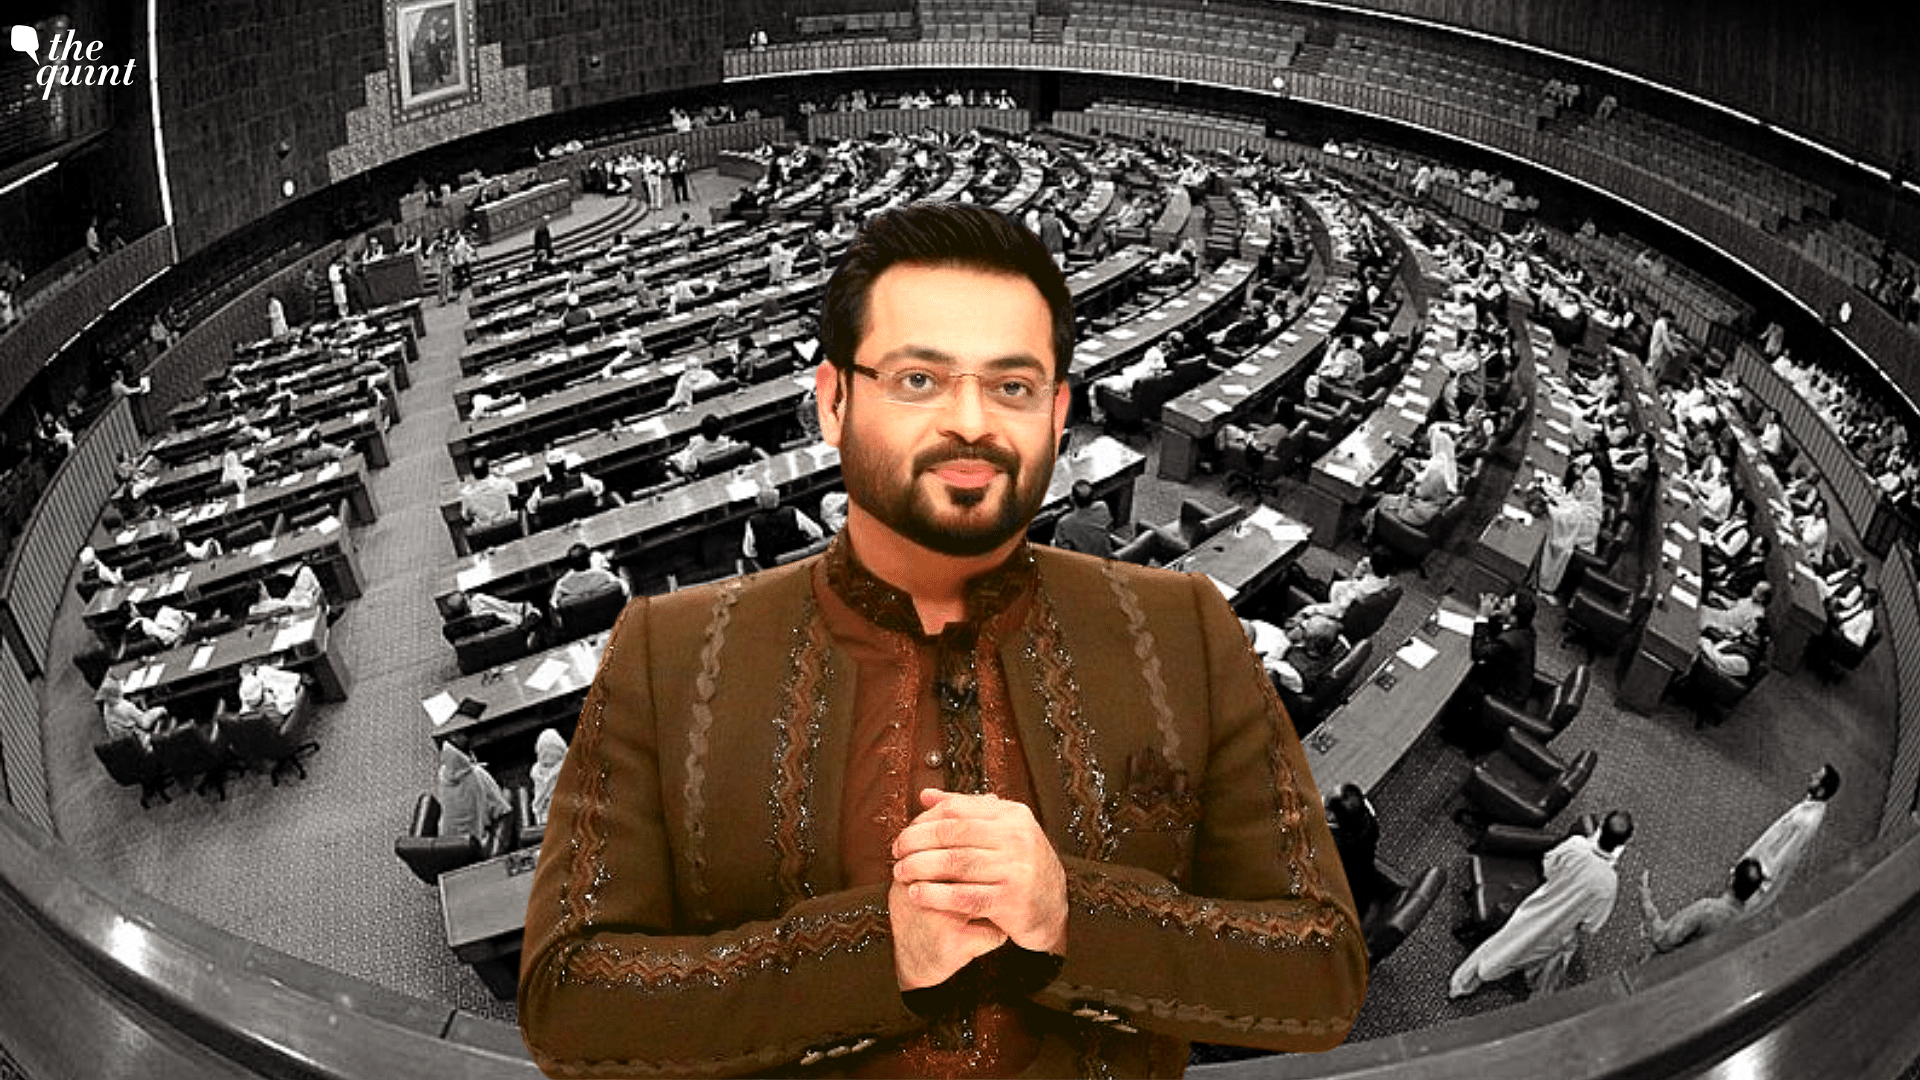 <div class="paragraphs"><p>Former <a href="https://www.thequint.com/topic/pakistan-national-assembly">Member of the National Assembly </a>and popular Pakistani TV host Aamir Liaquat died at age 50 on Thursday, 9 June, <em>Dawn</em> reported.</p><p><br></p></div>